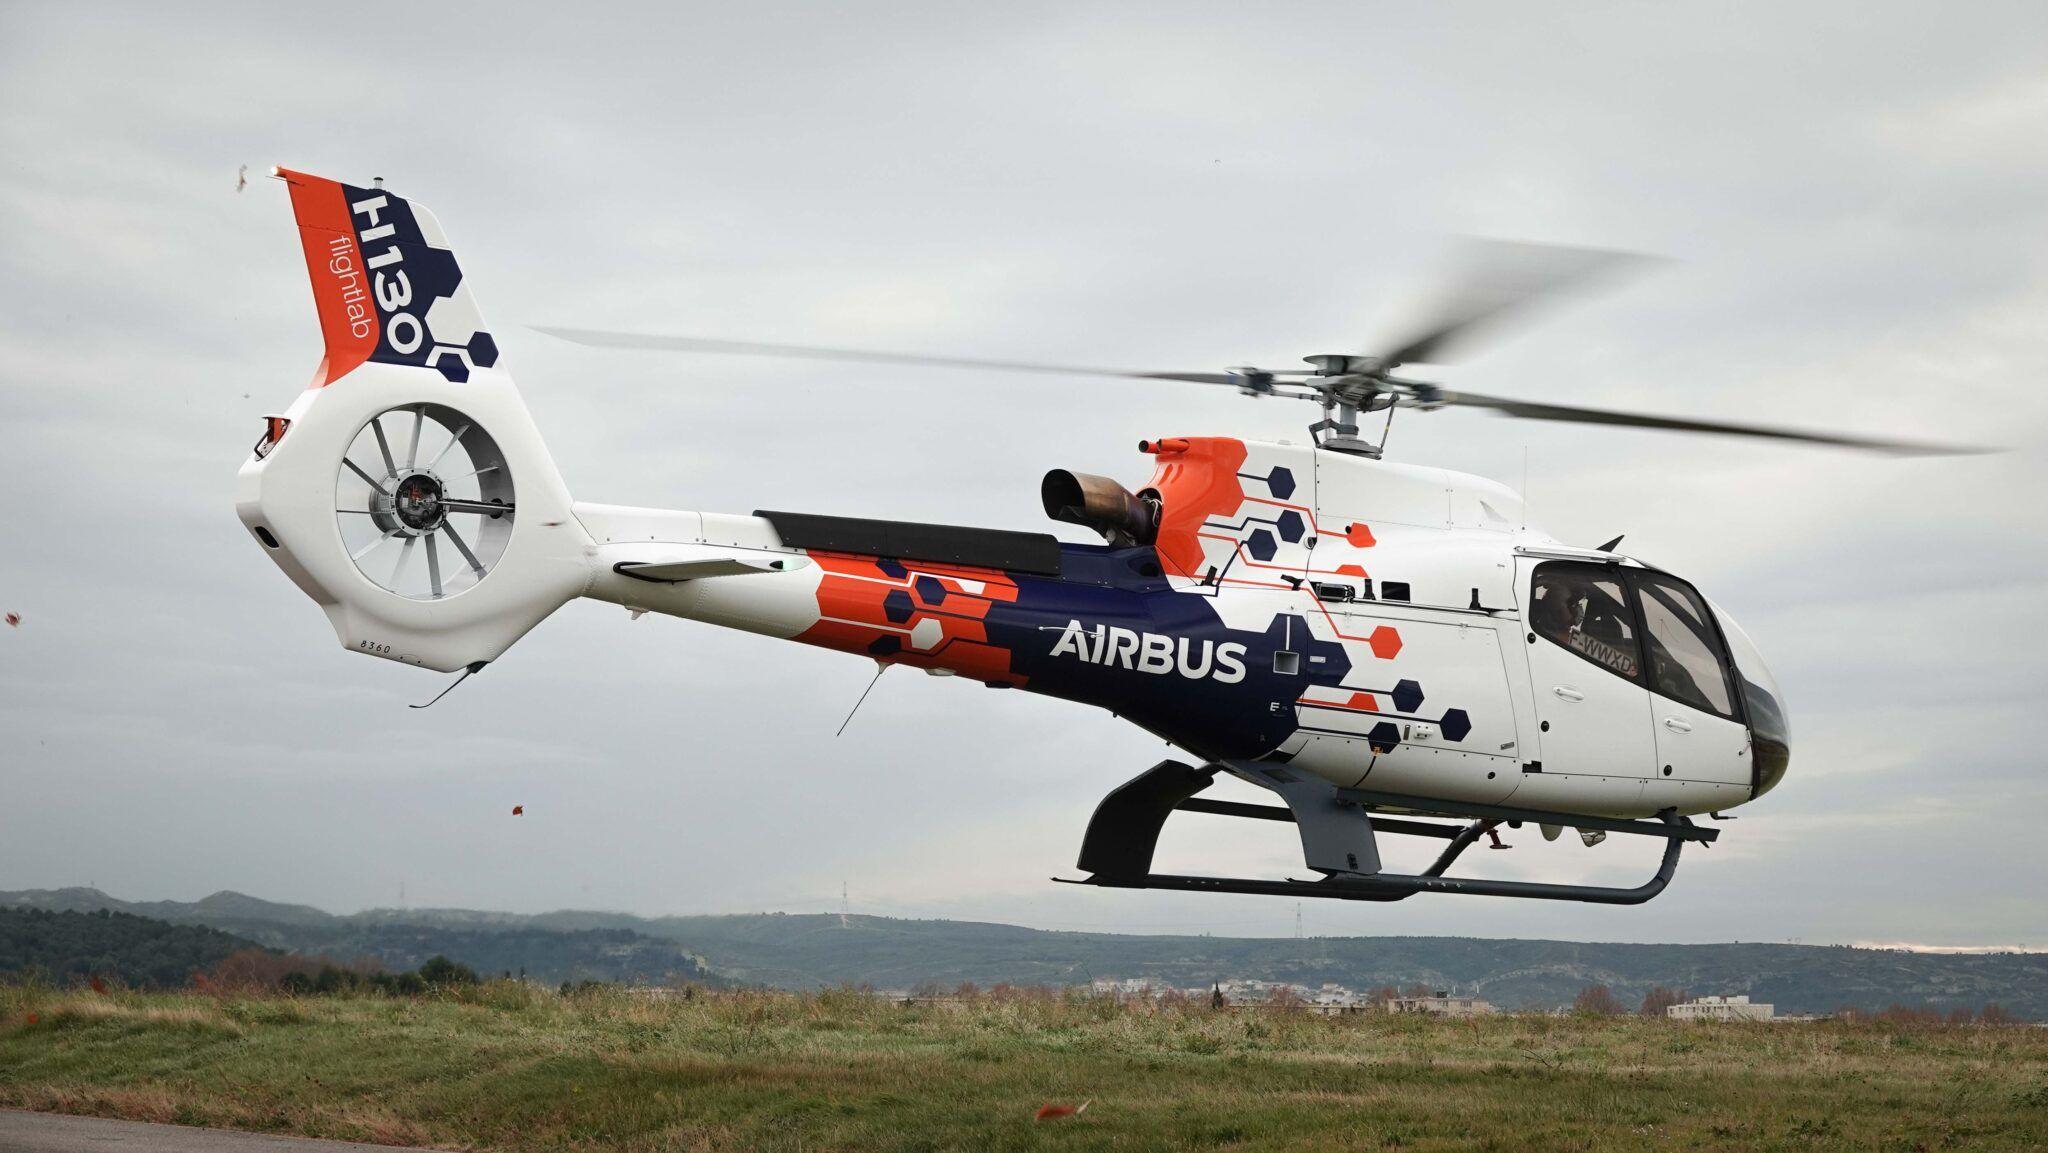 Airbus Helicopters Acquires ZF Luftfahrttechnik, Strengthens MRO Capabilities